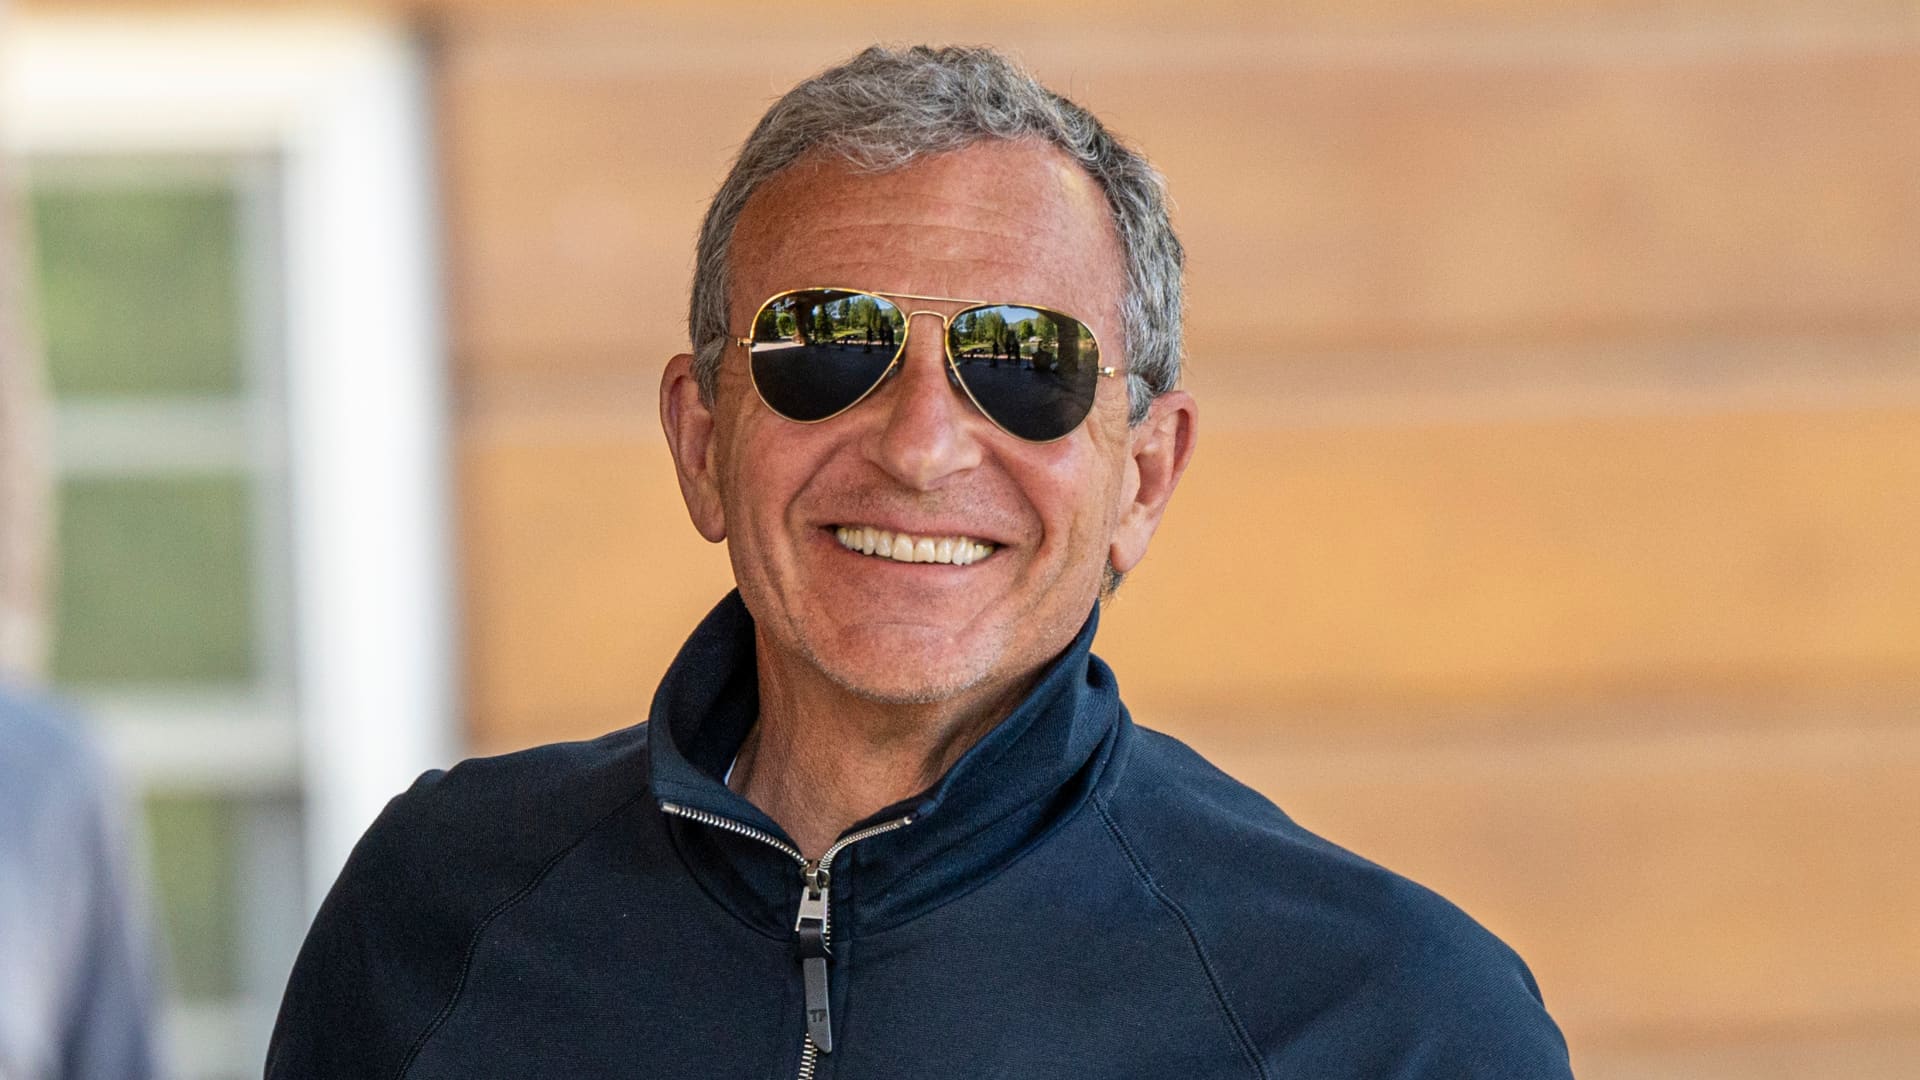 Disney's Iger says Peltz proxy battle was a 'distraction,' board is focused on picking his successor